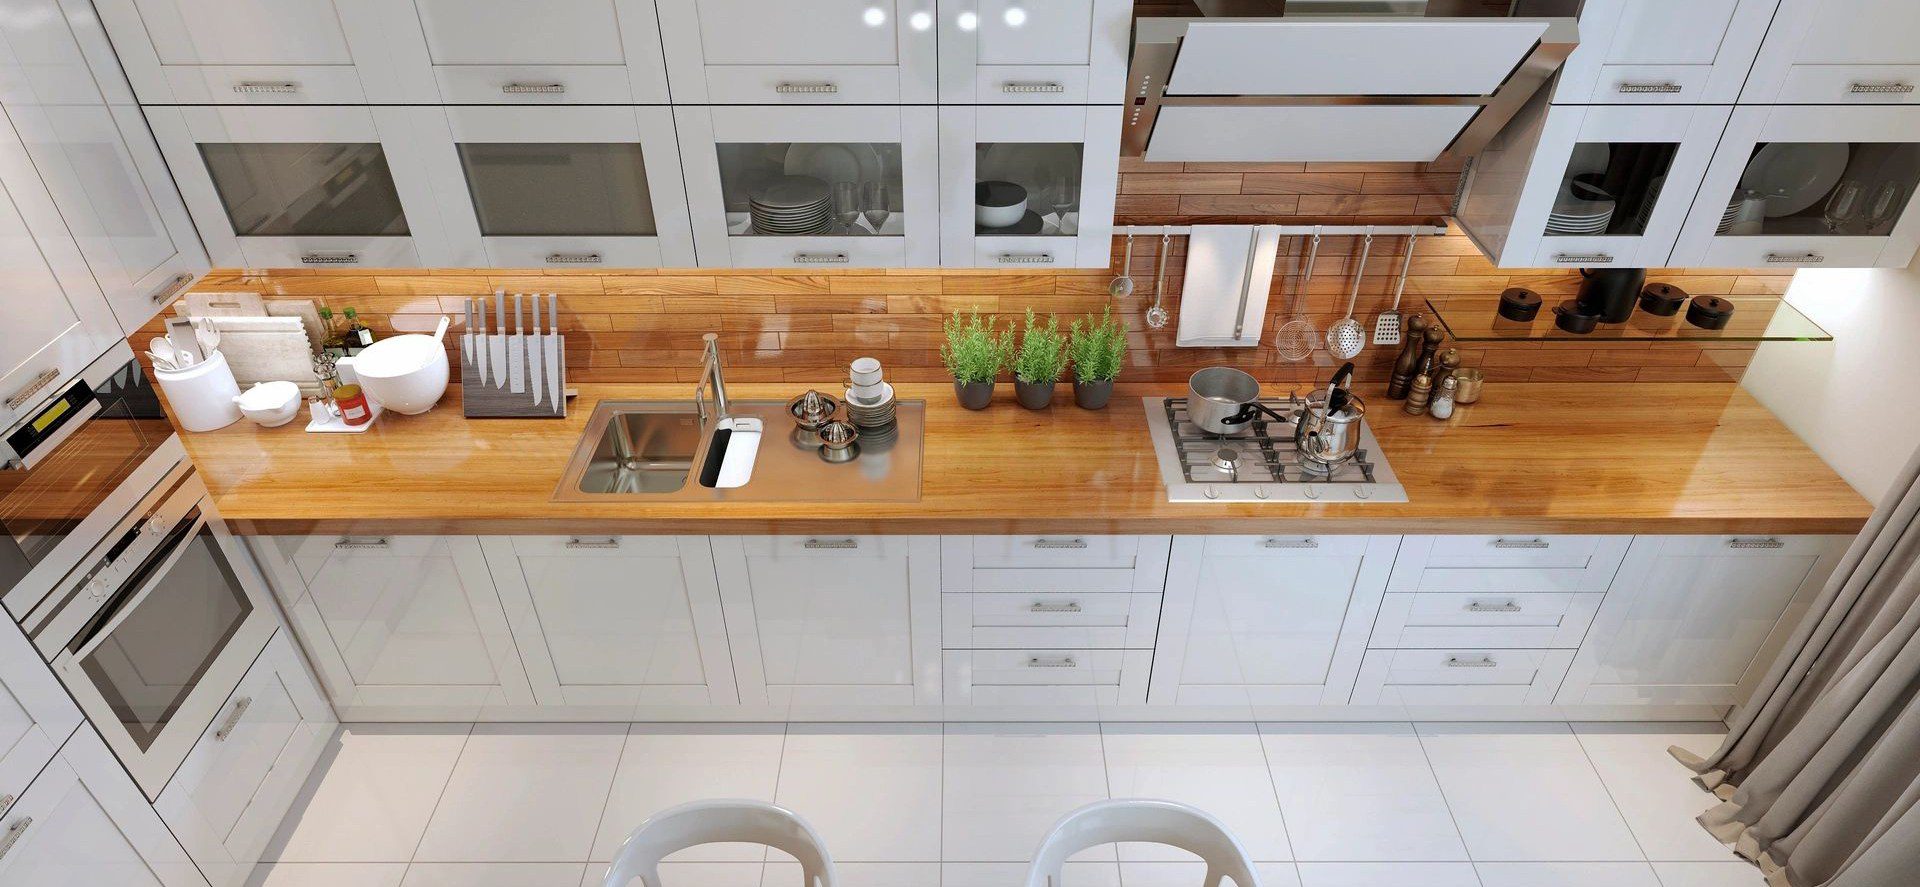 A kitchen with white cabinets and wooden counters.